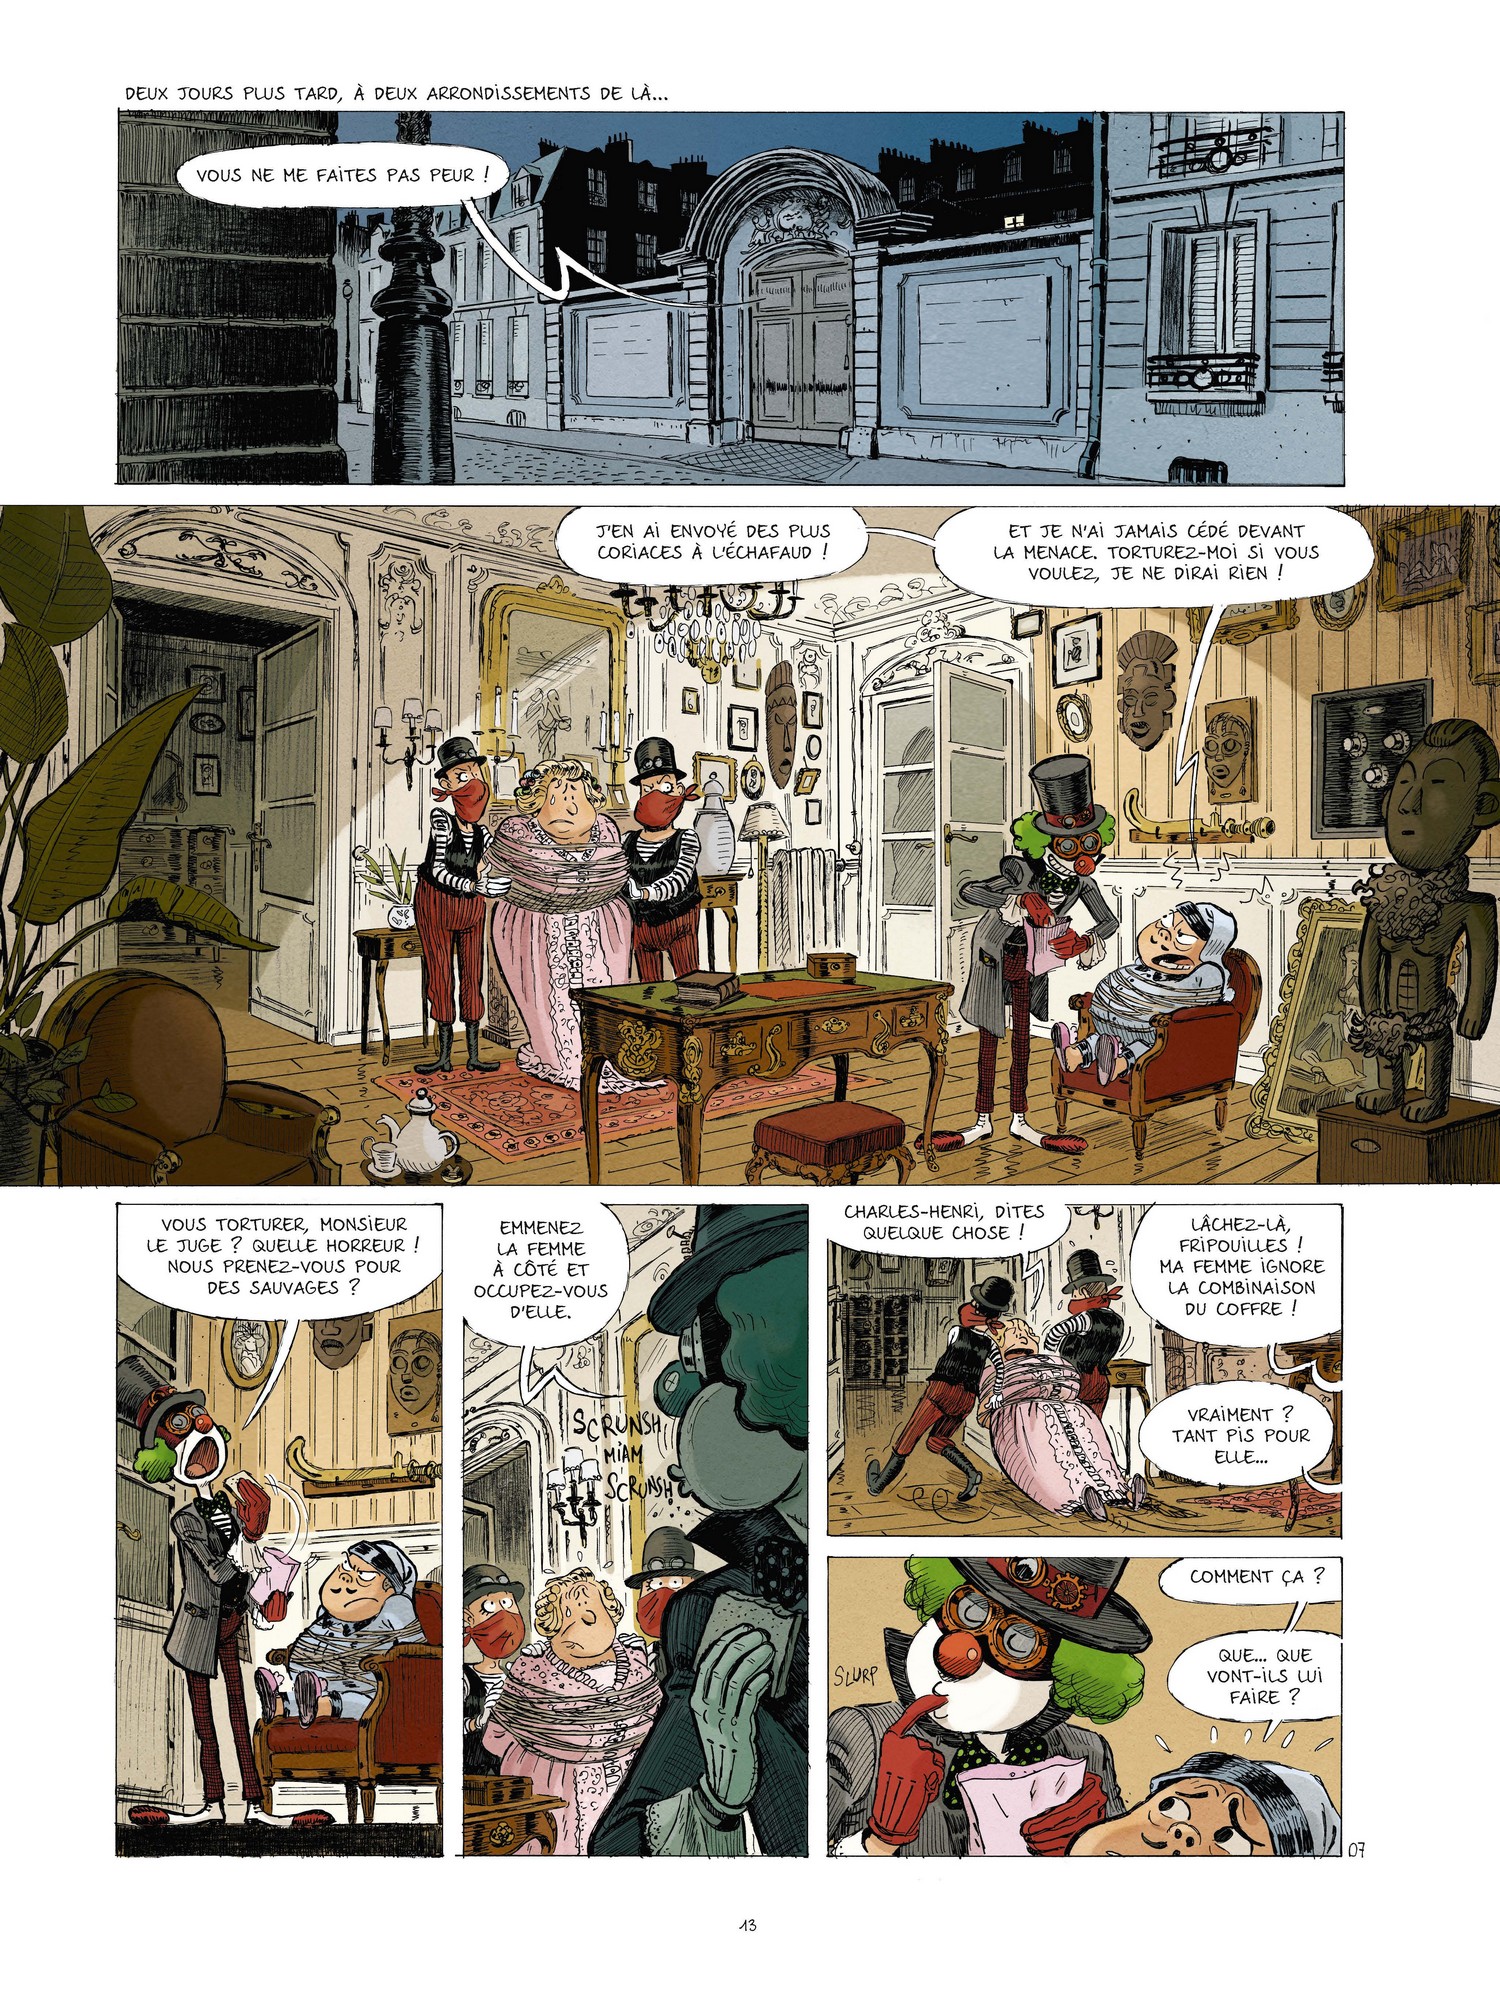 spectaculaires_5_pages_inte_page_1